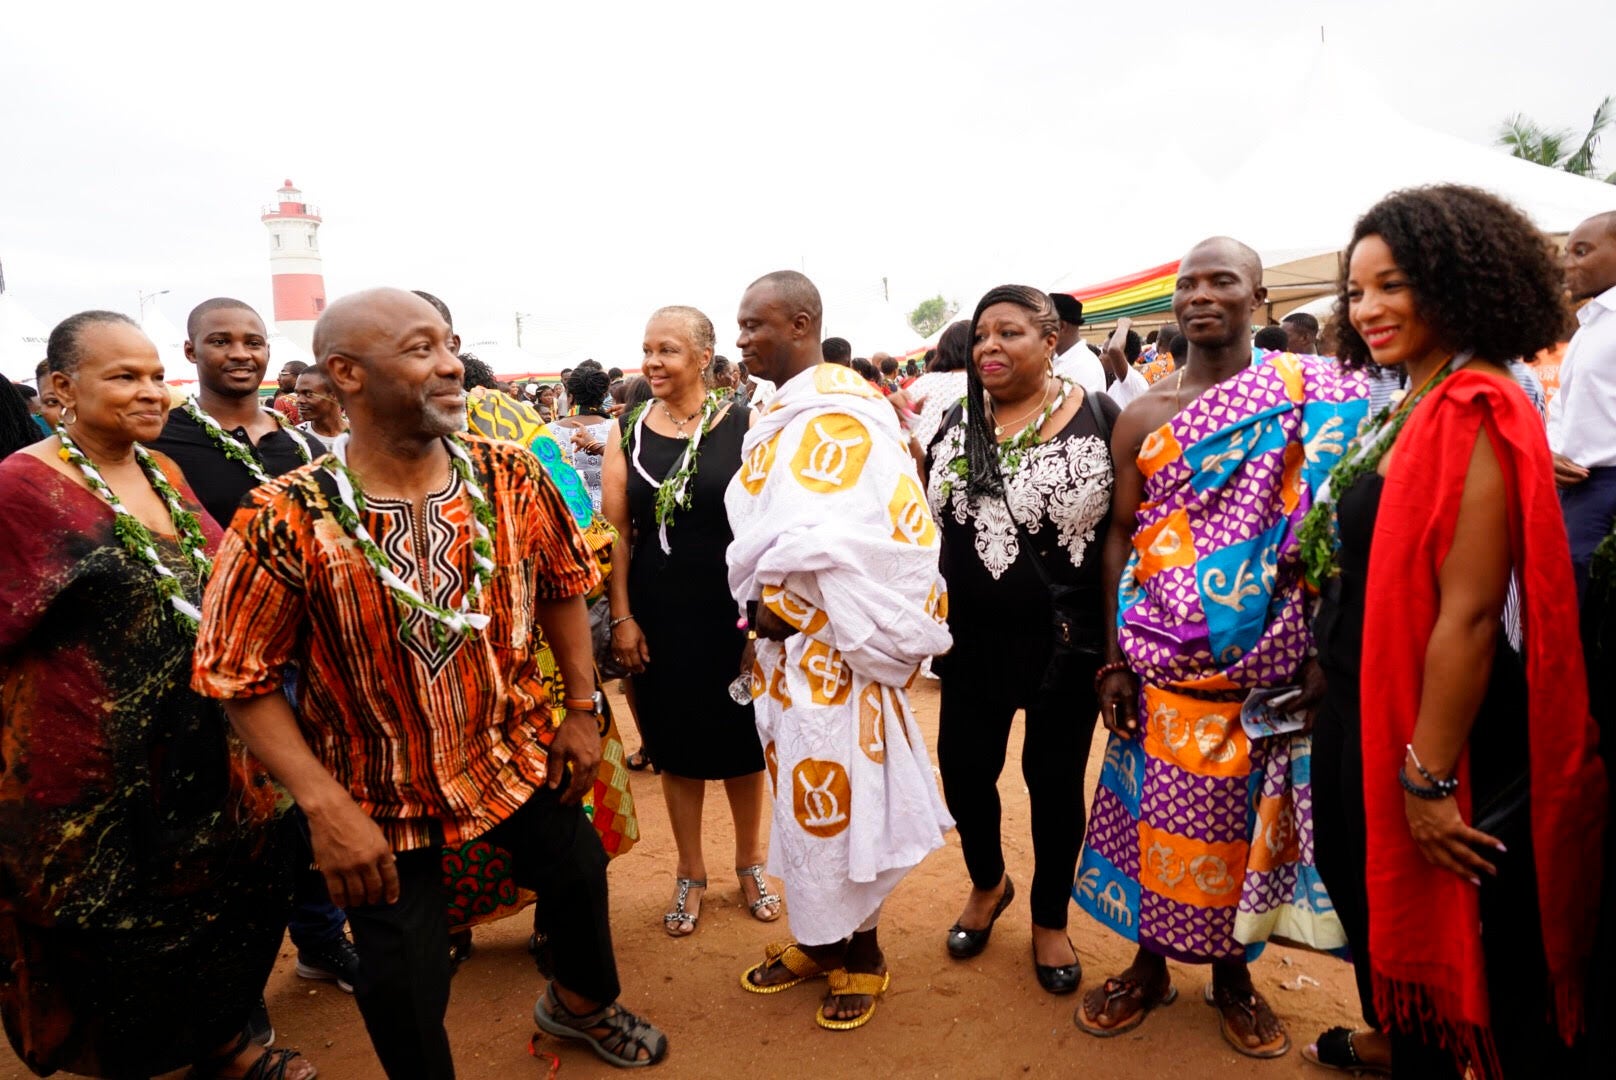 Airbnb Partners With NAACP To Promote Travel To Ghana For ‘The Year of Return’